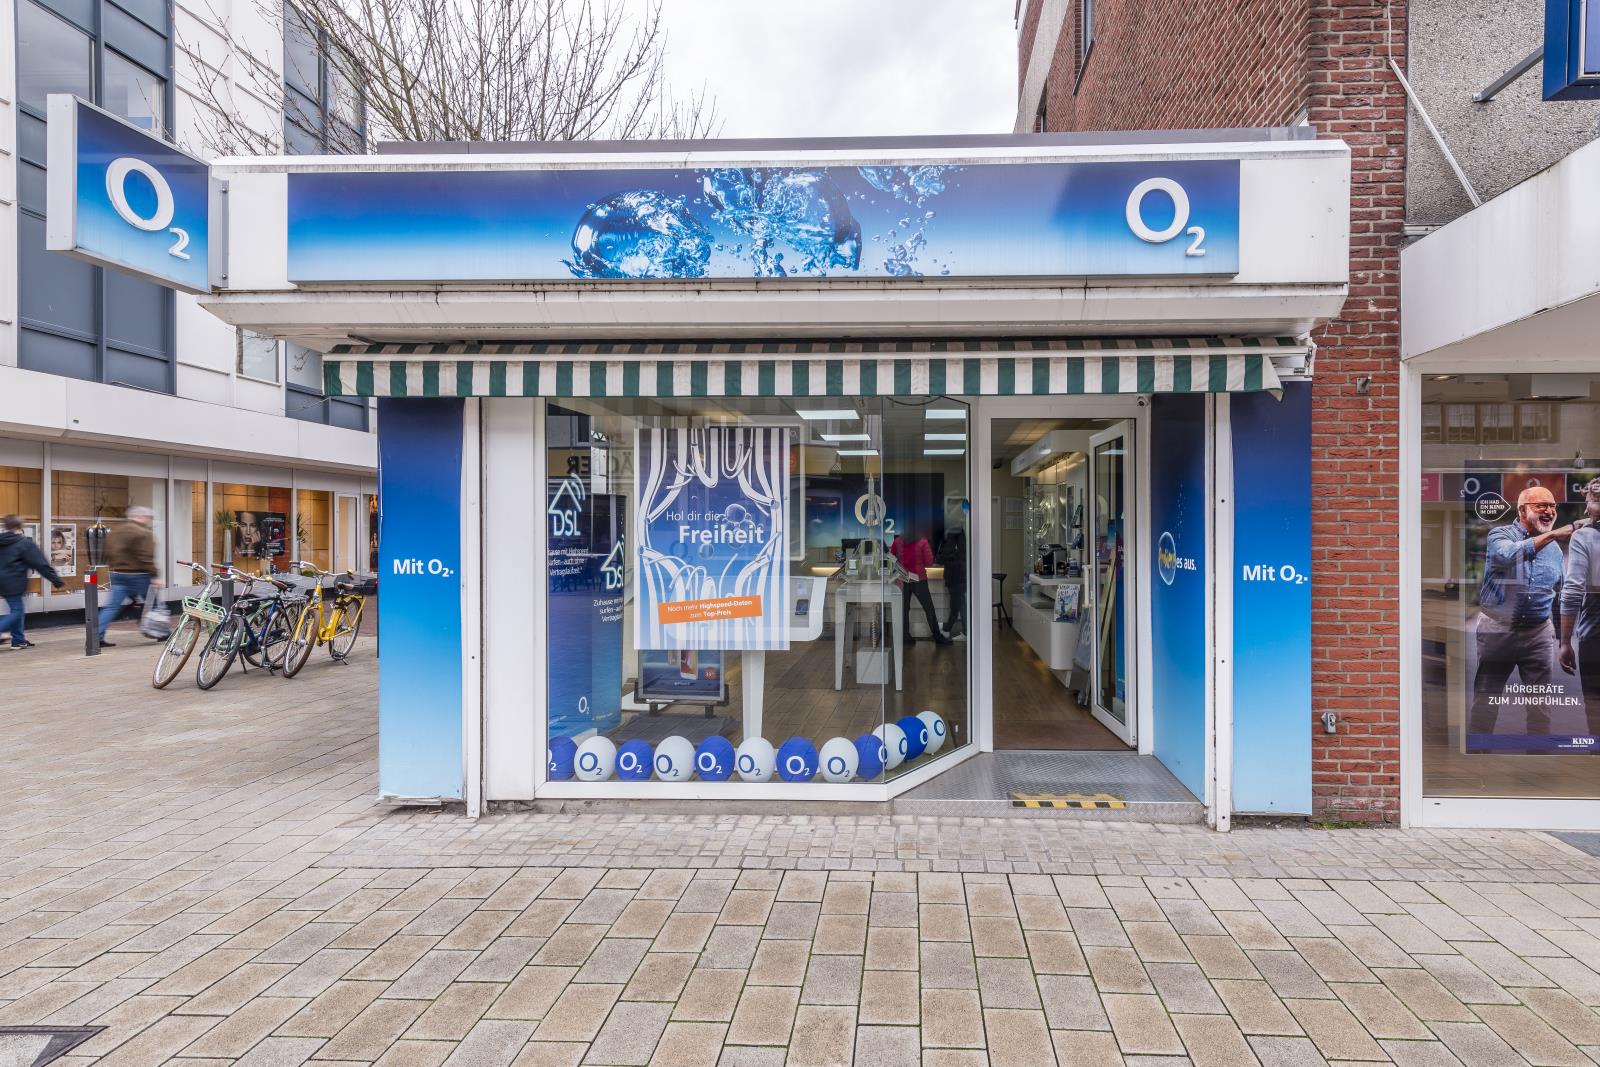 o2 Shop, Hohe Str. 42 in Wesel